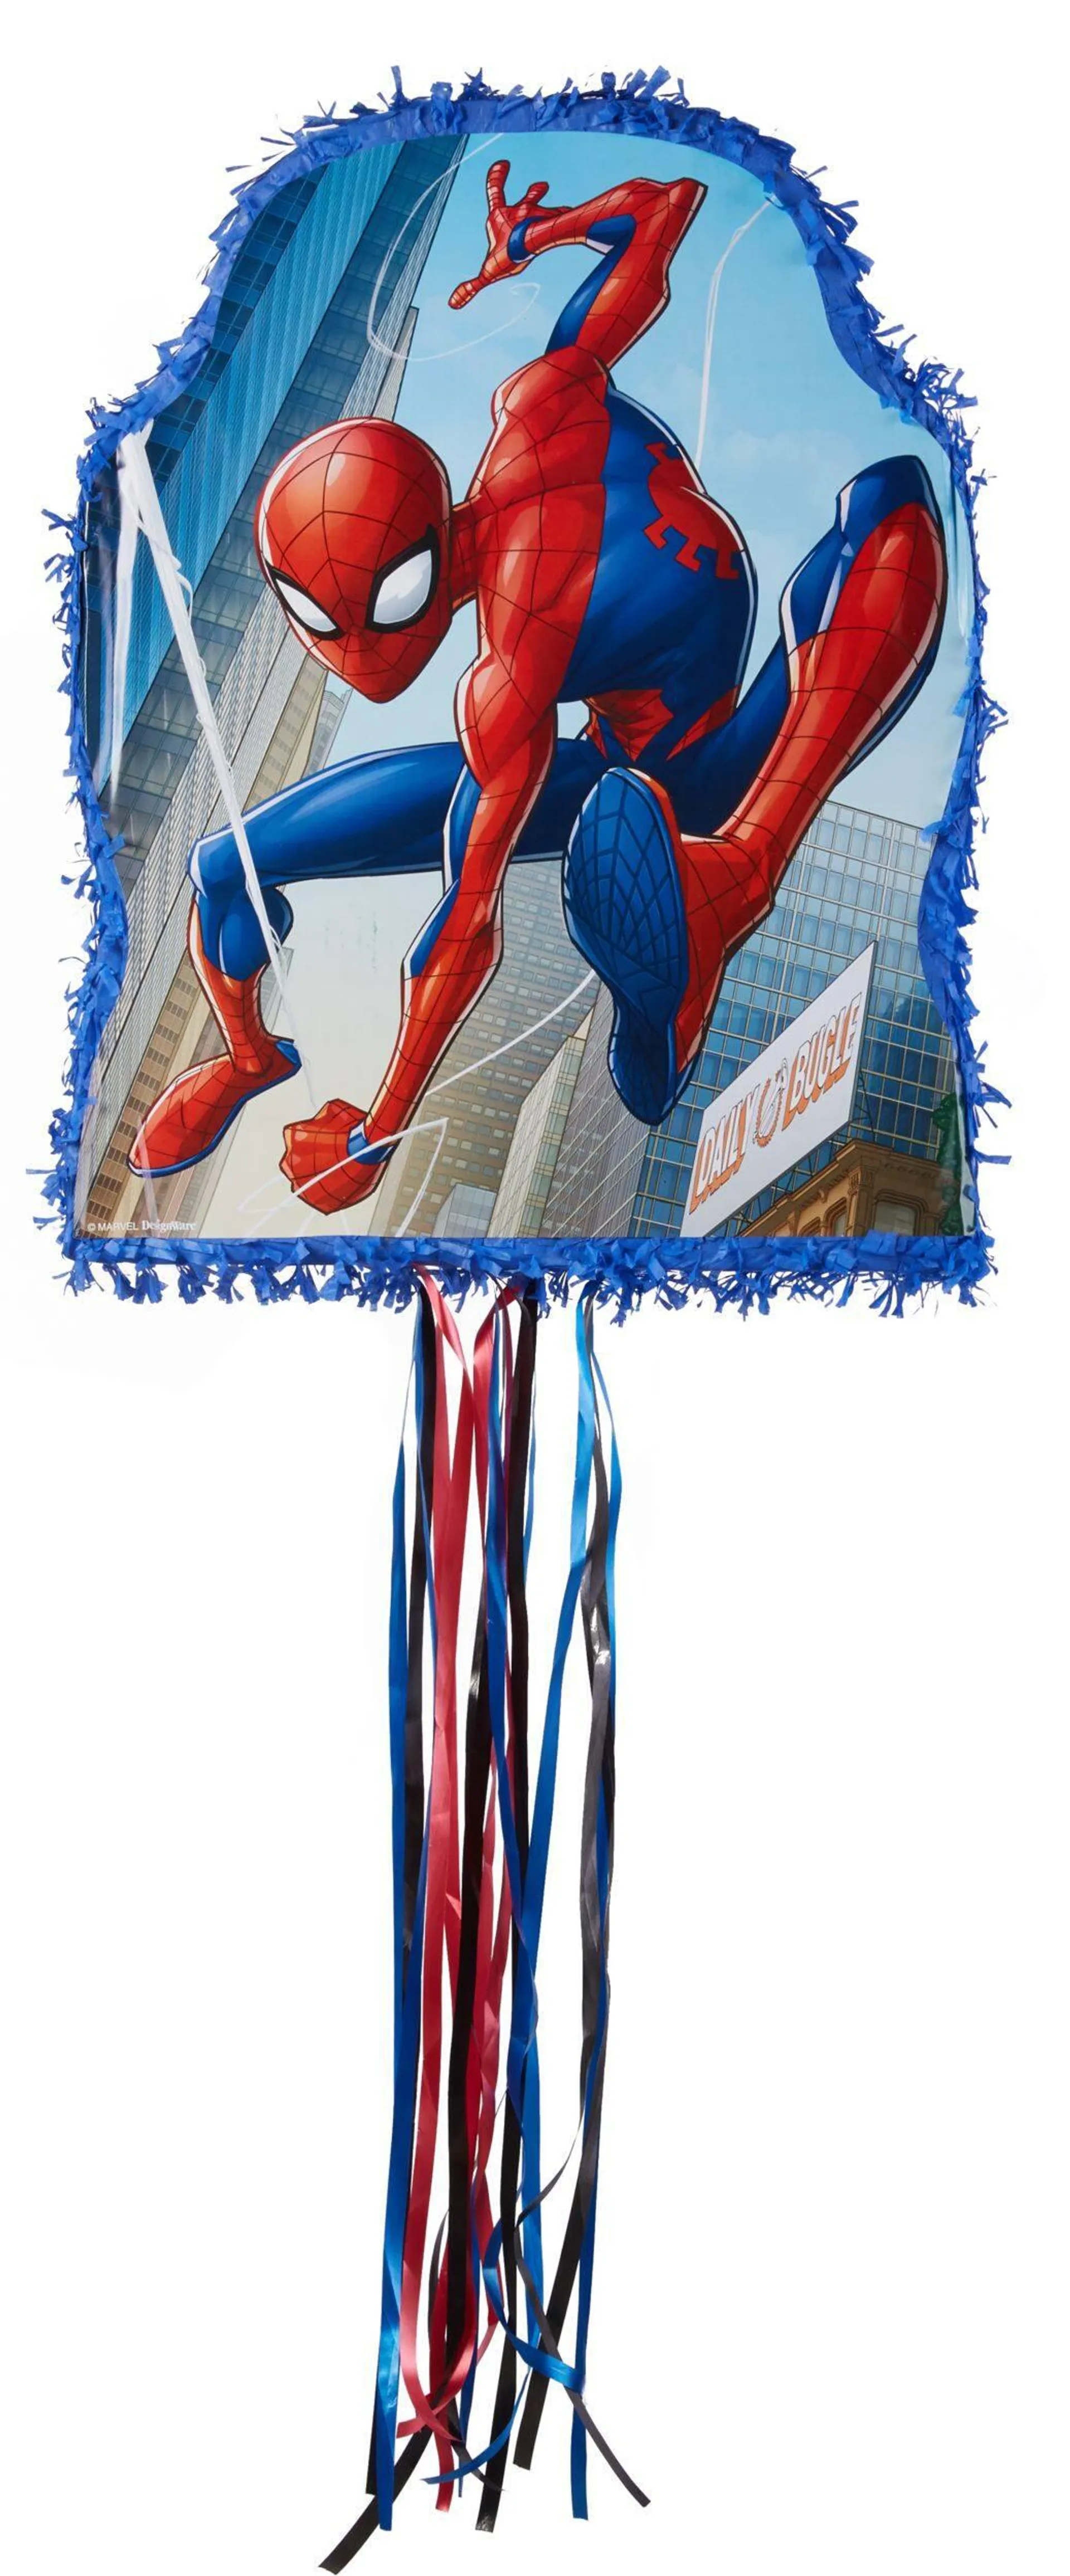 Disney Marvel Spider-Man Pinata Hanging Pull String Decoration, Blue/Red, 21.5-in, Holds 2lb of Pinata Filler, for Birthday Parties